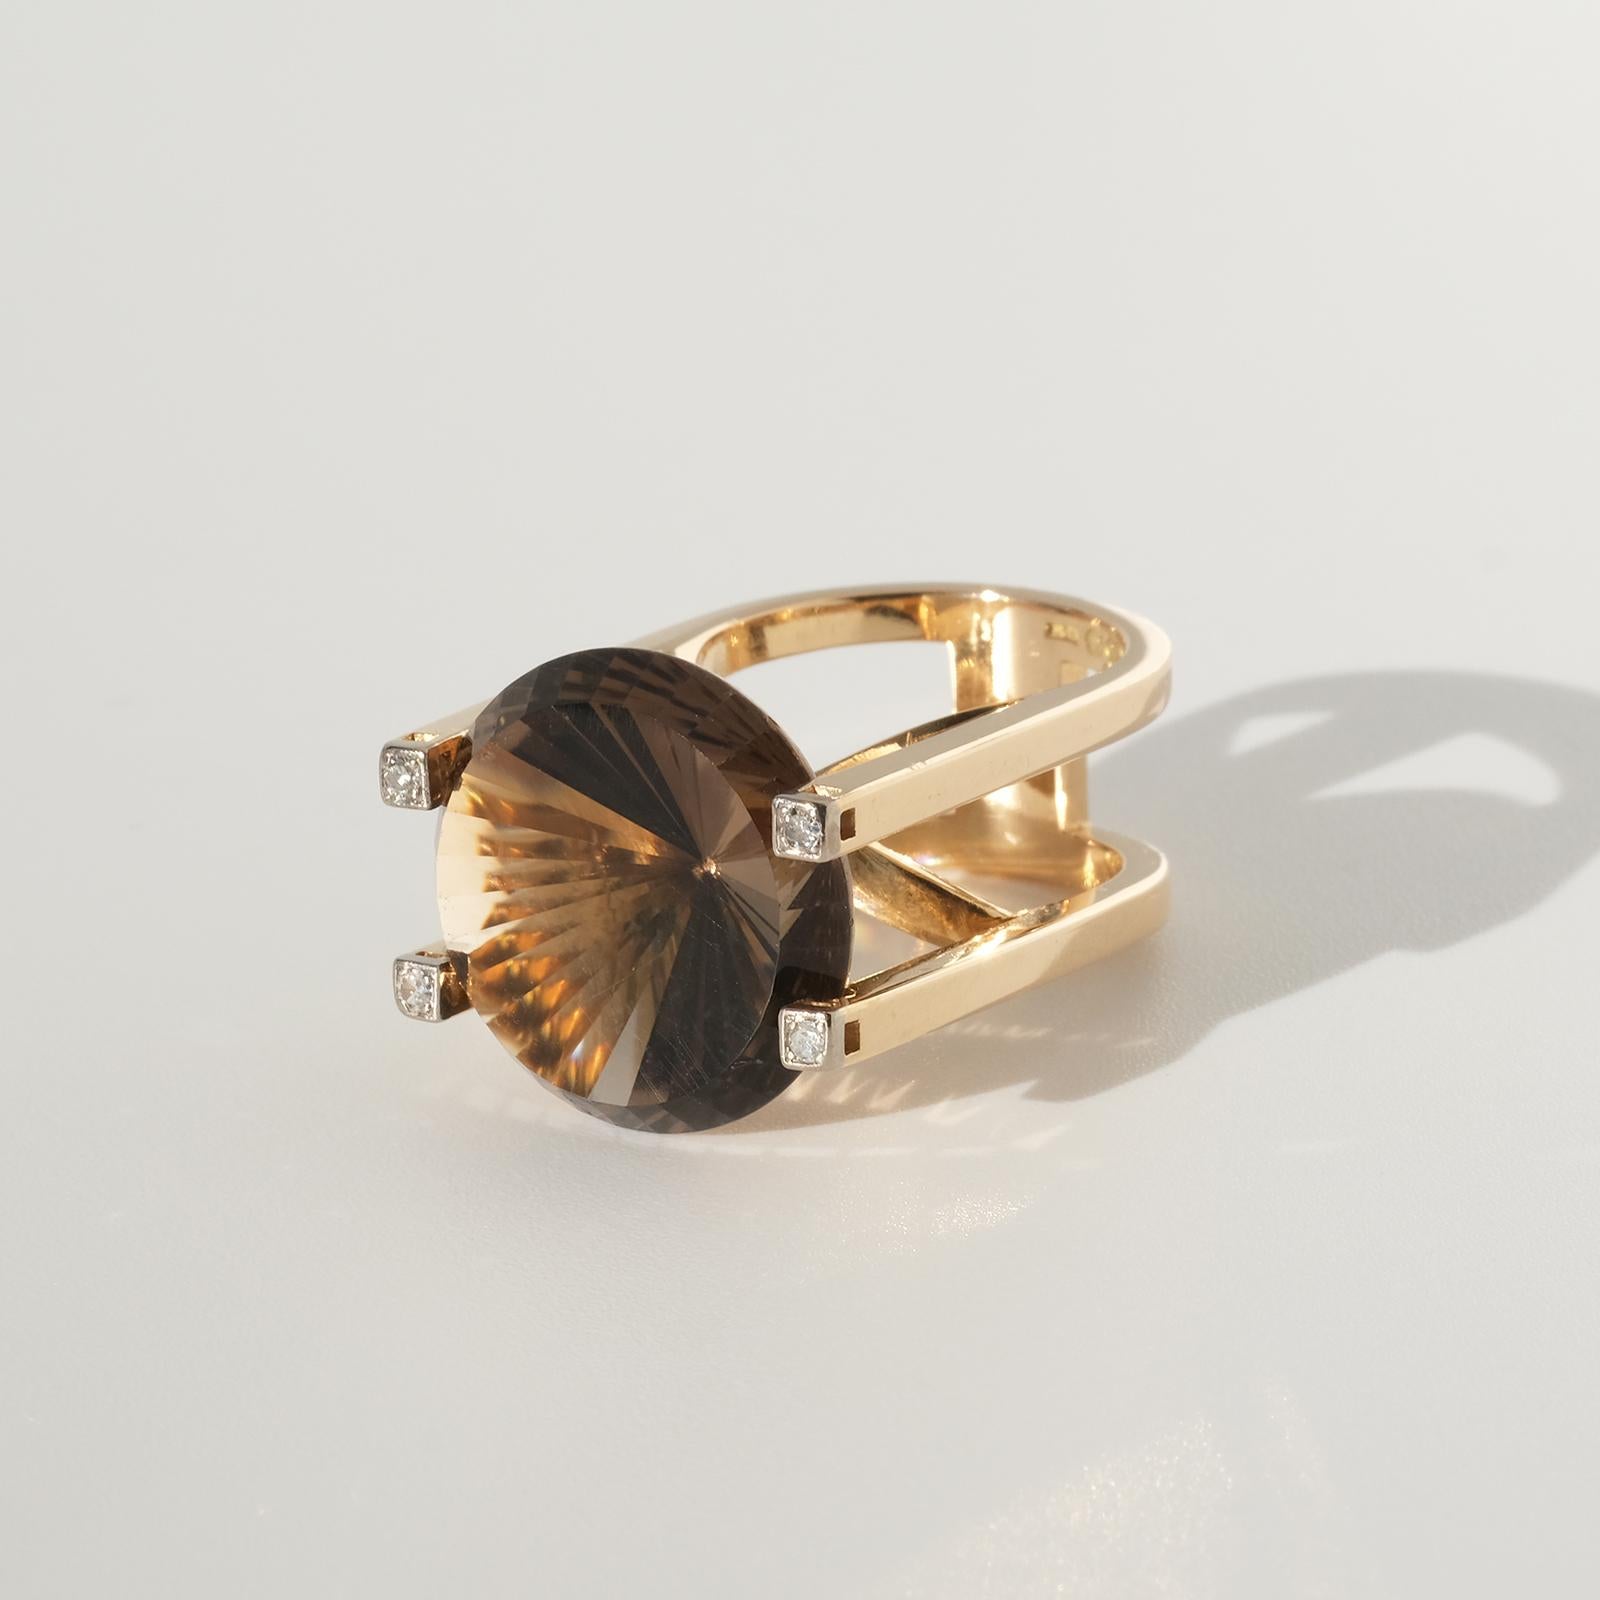 This luxurious 18 karat gold, smoky quartz and diamond ring has an exquisite design with its high shaped setting and its big mixed cut smoky quartz. The final touch is the four octagon cut diamonds.

This ring is perfect for the cocktail party and